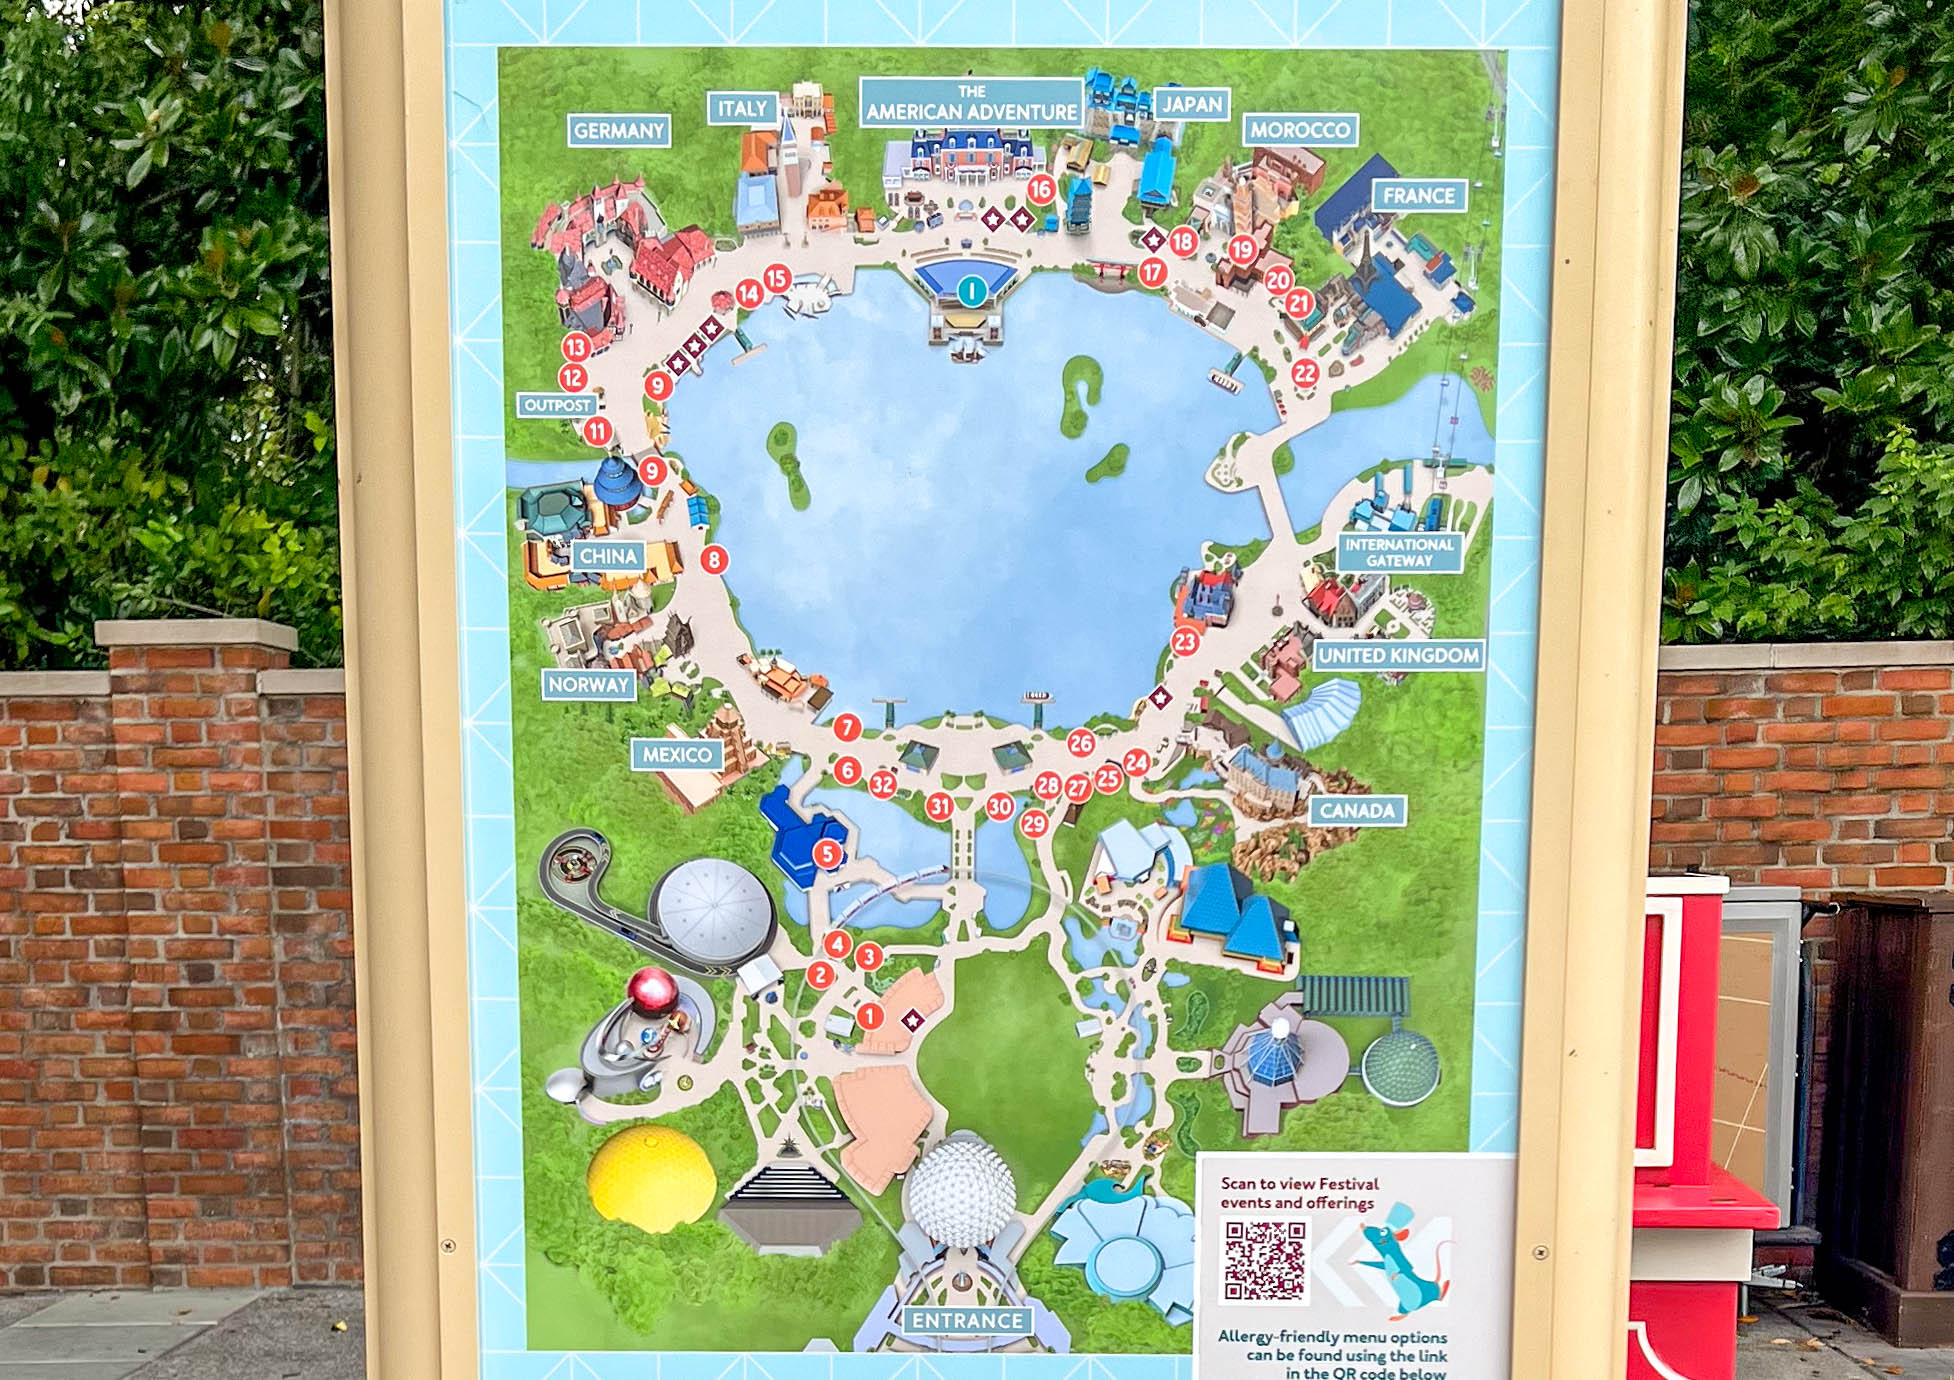 PHOTOS 2023 Food & Wine Festival Map Spotted in Disney World